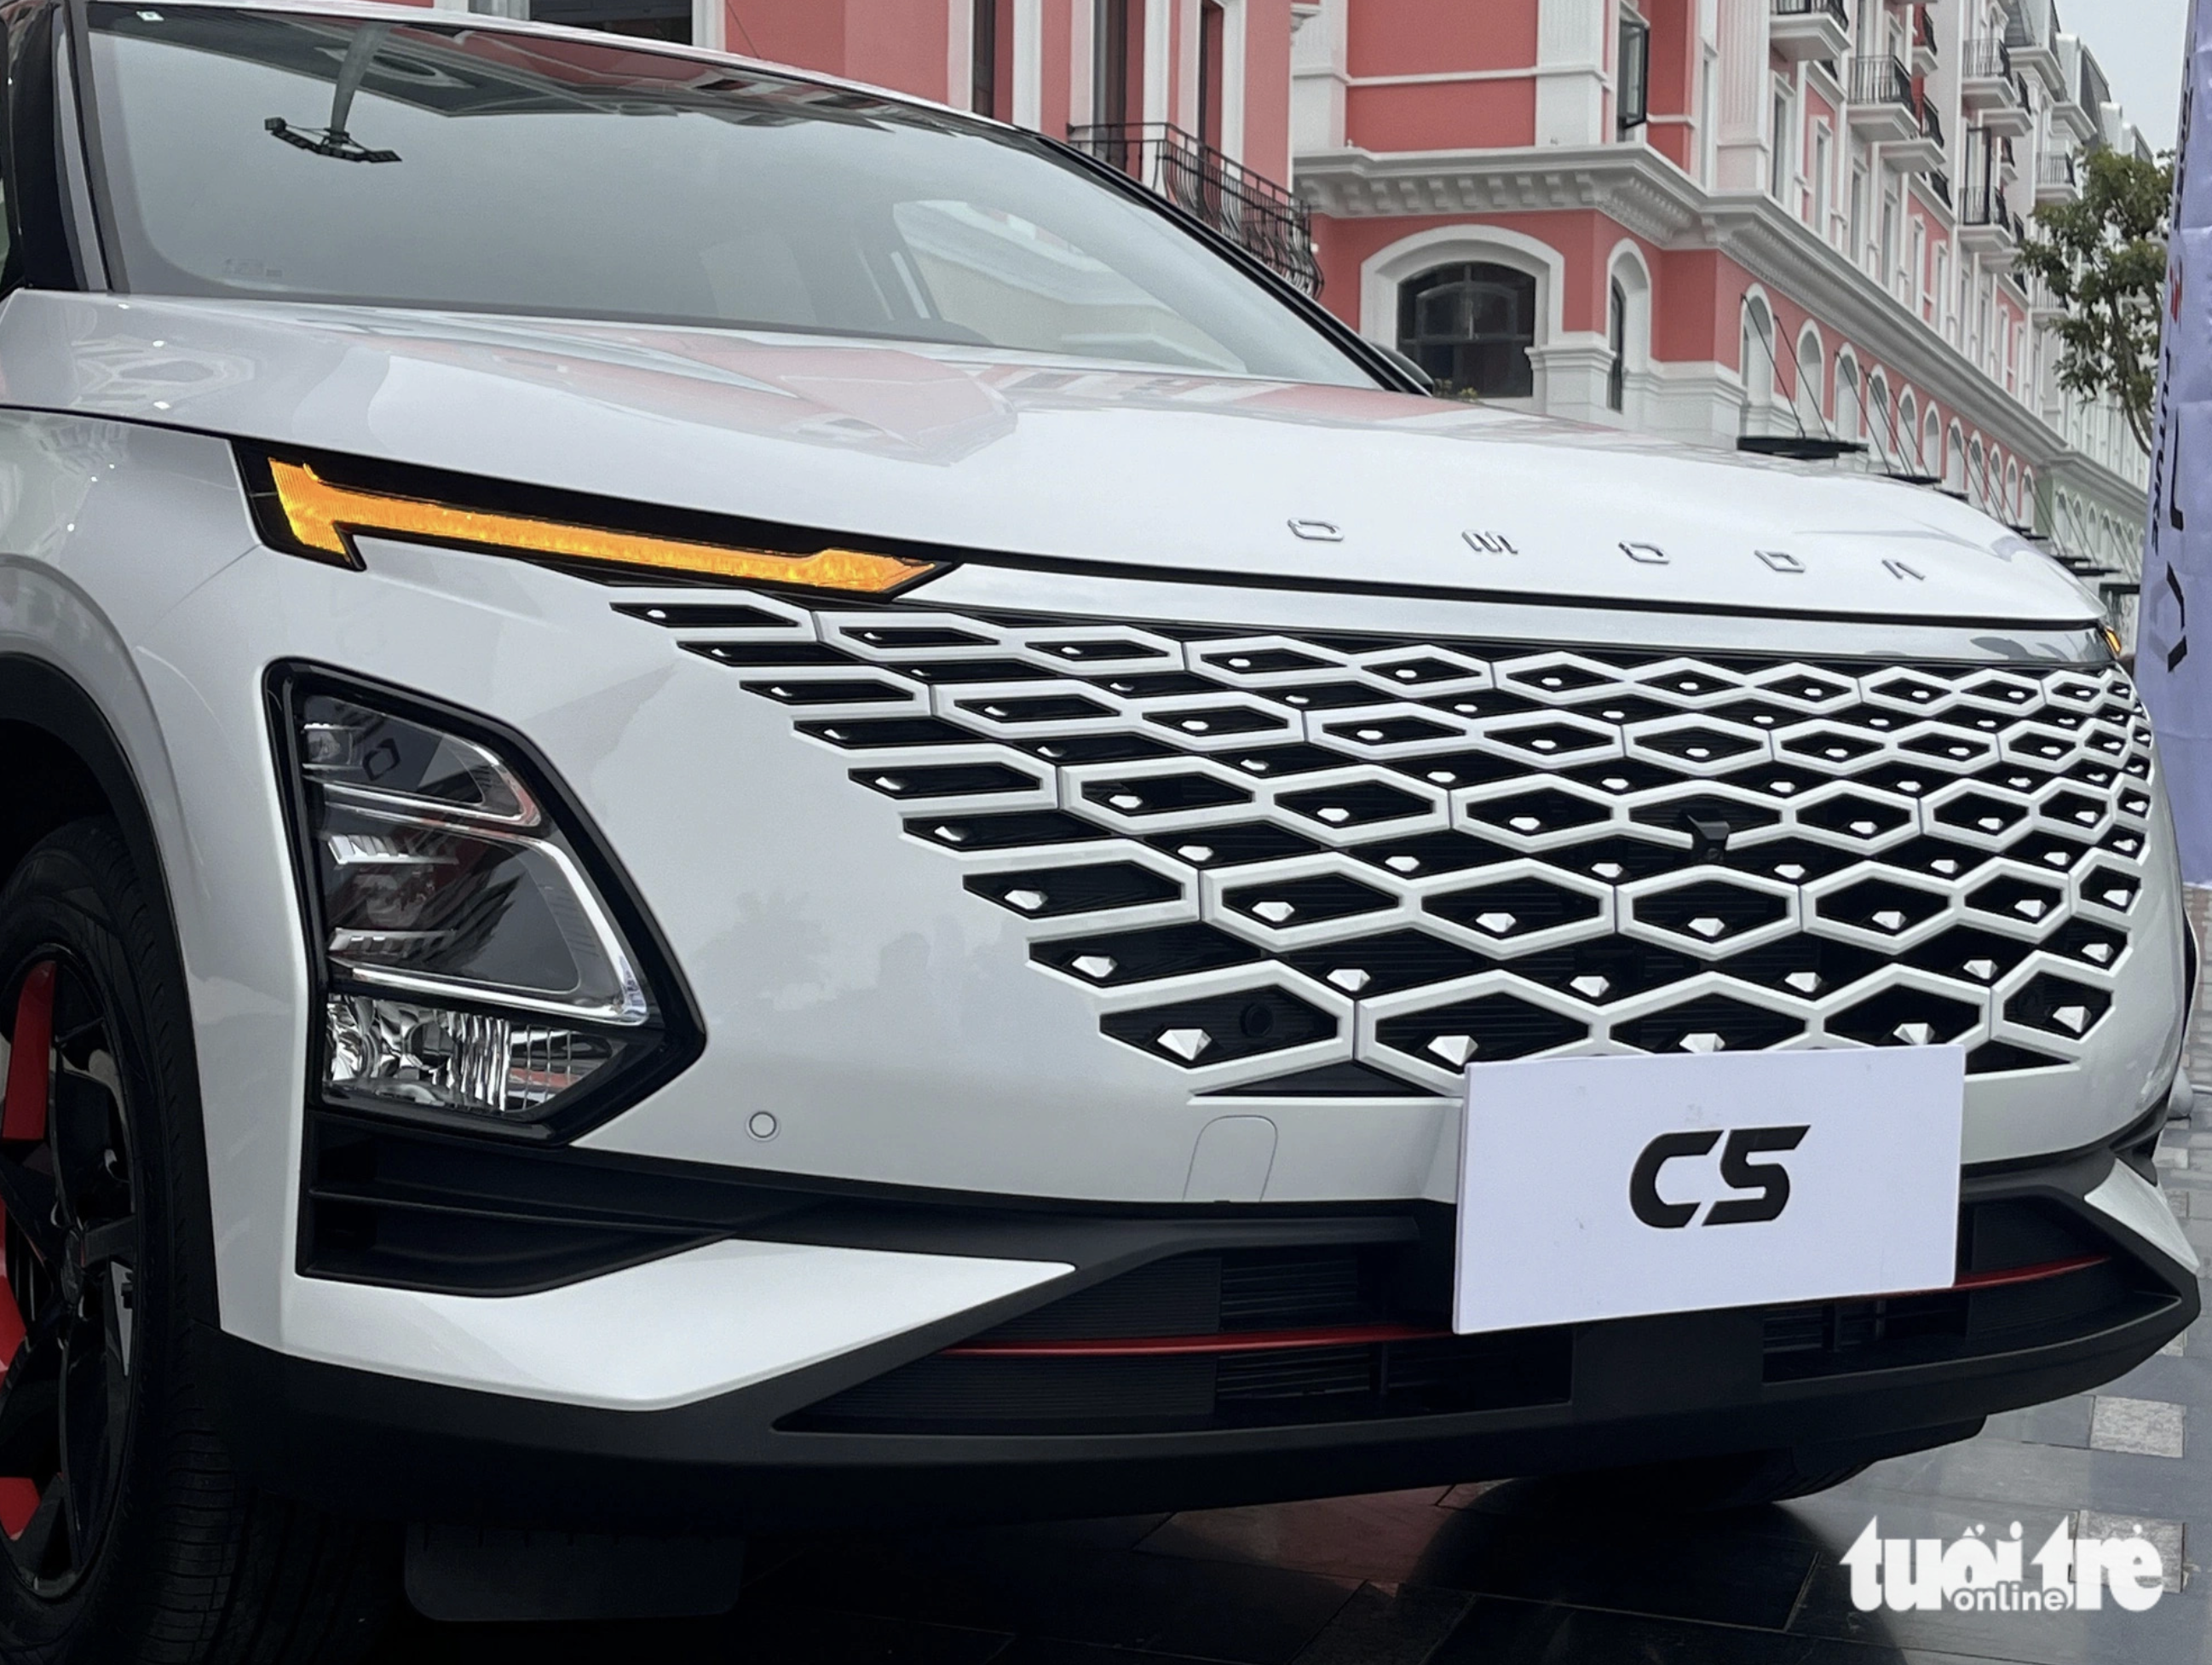 The front end of the Omoda C5 consists of a ‘diamond matrix’ front grille, a two-tier lighting system and an LED strip light. Photo: Tuoi Tre